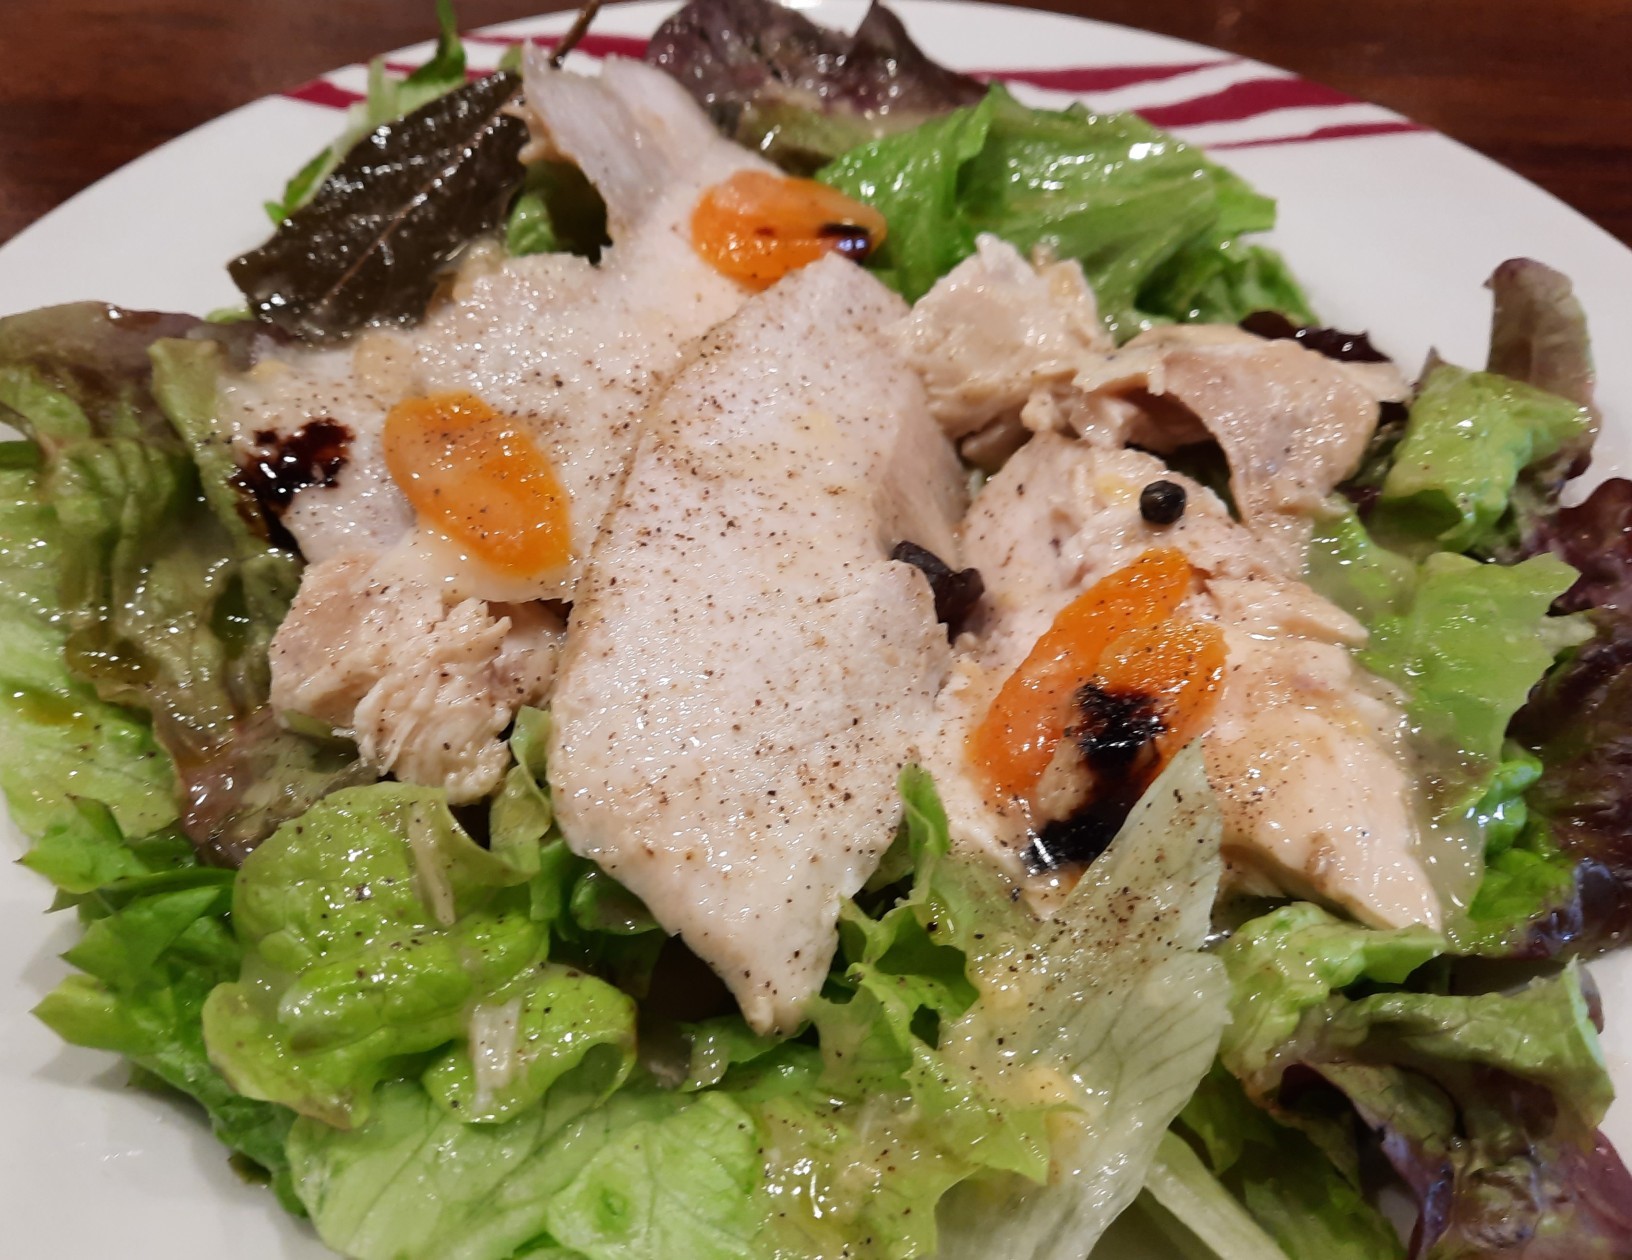 Chicken in 'escabeche' (marinated and cooked in vinegar and paprika) salad 